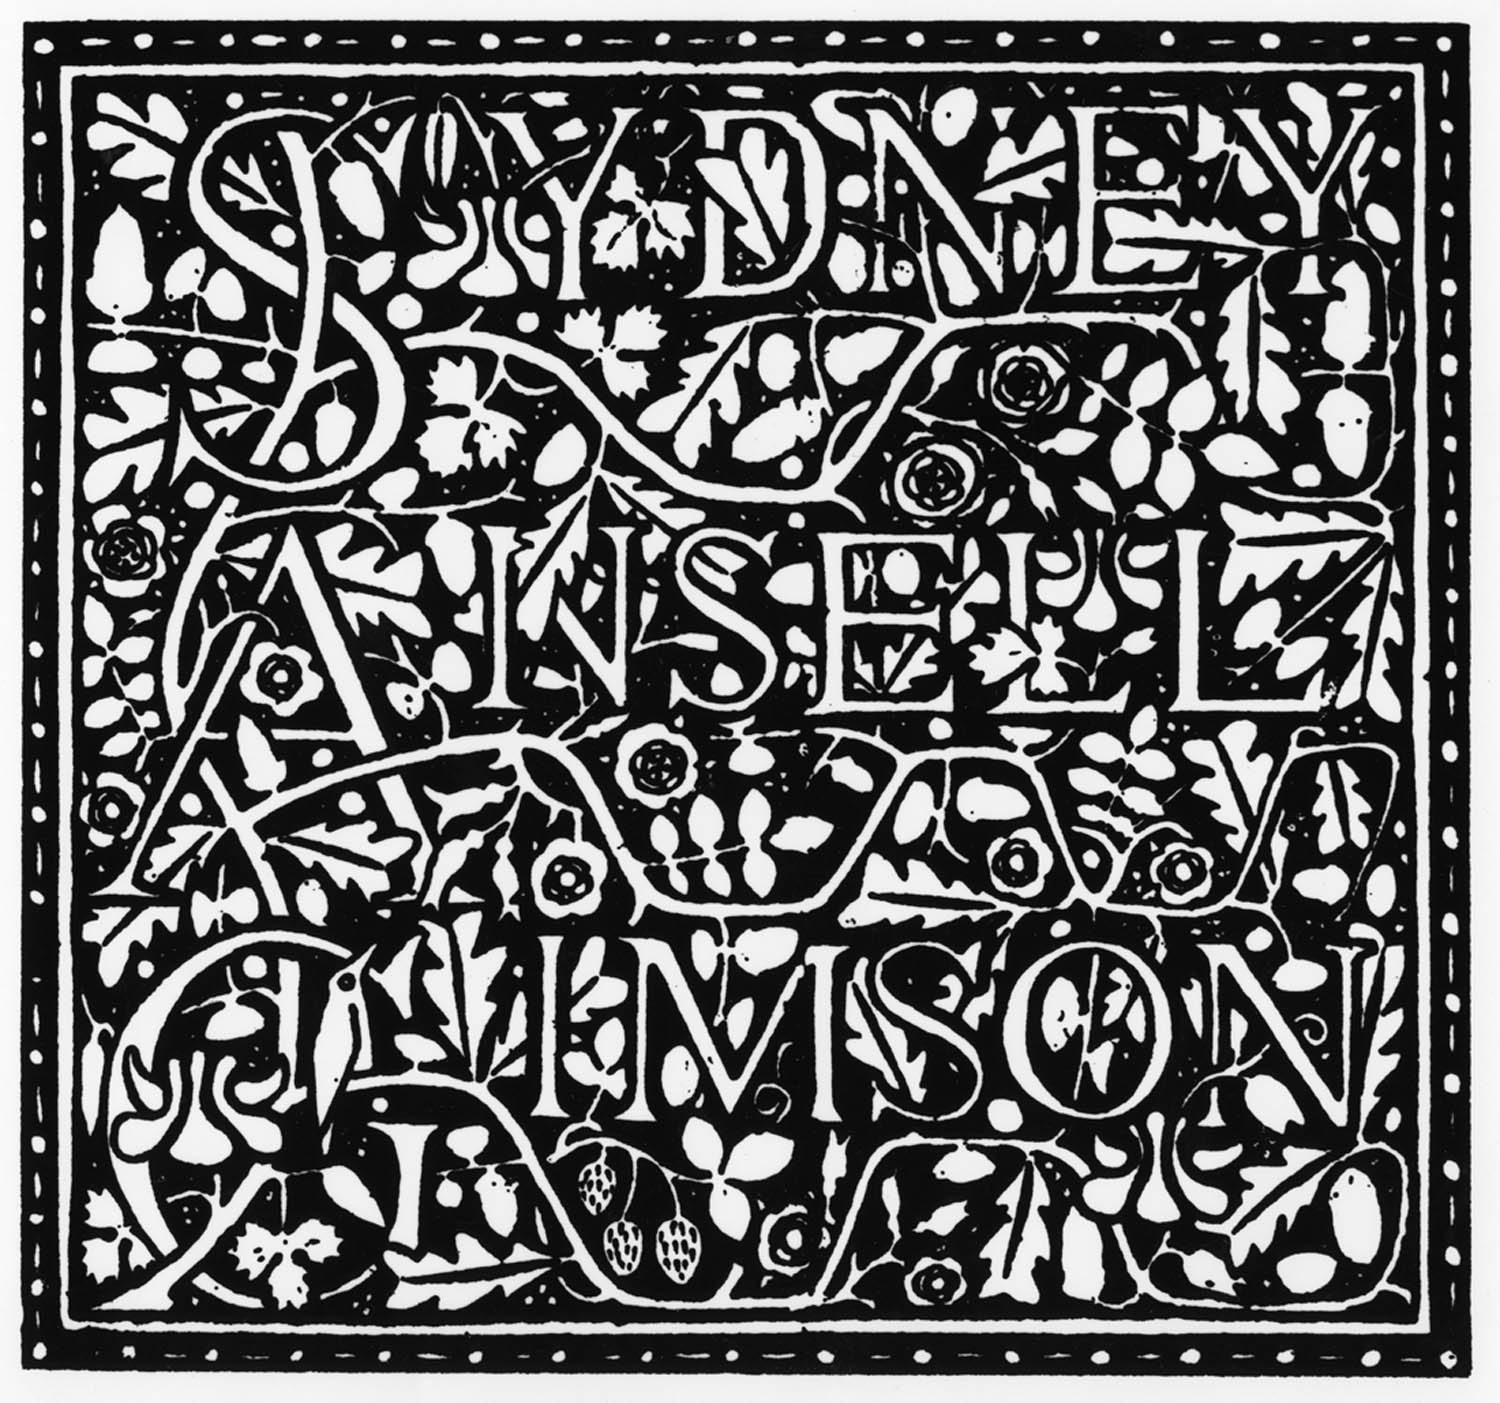 Bookplate designed by Ernest Gimson in 1898 for his brother Sydney -